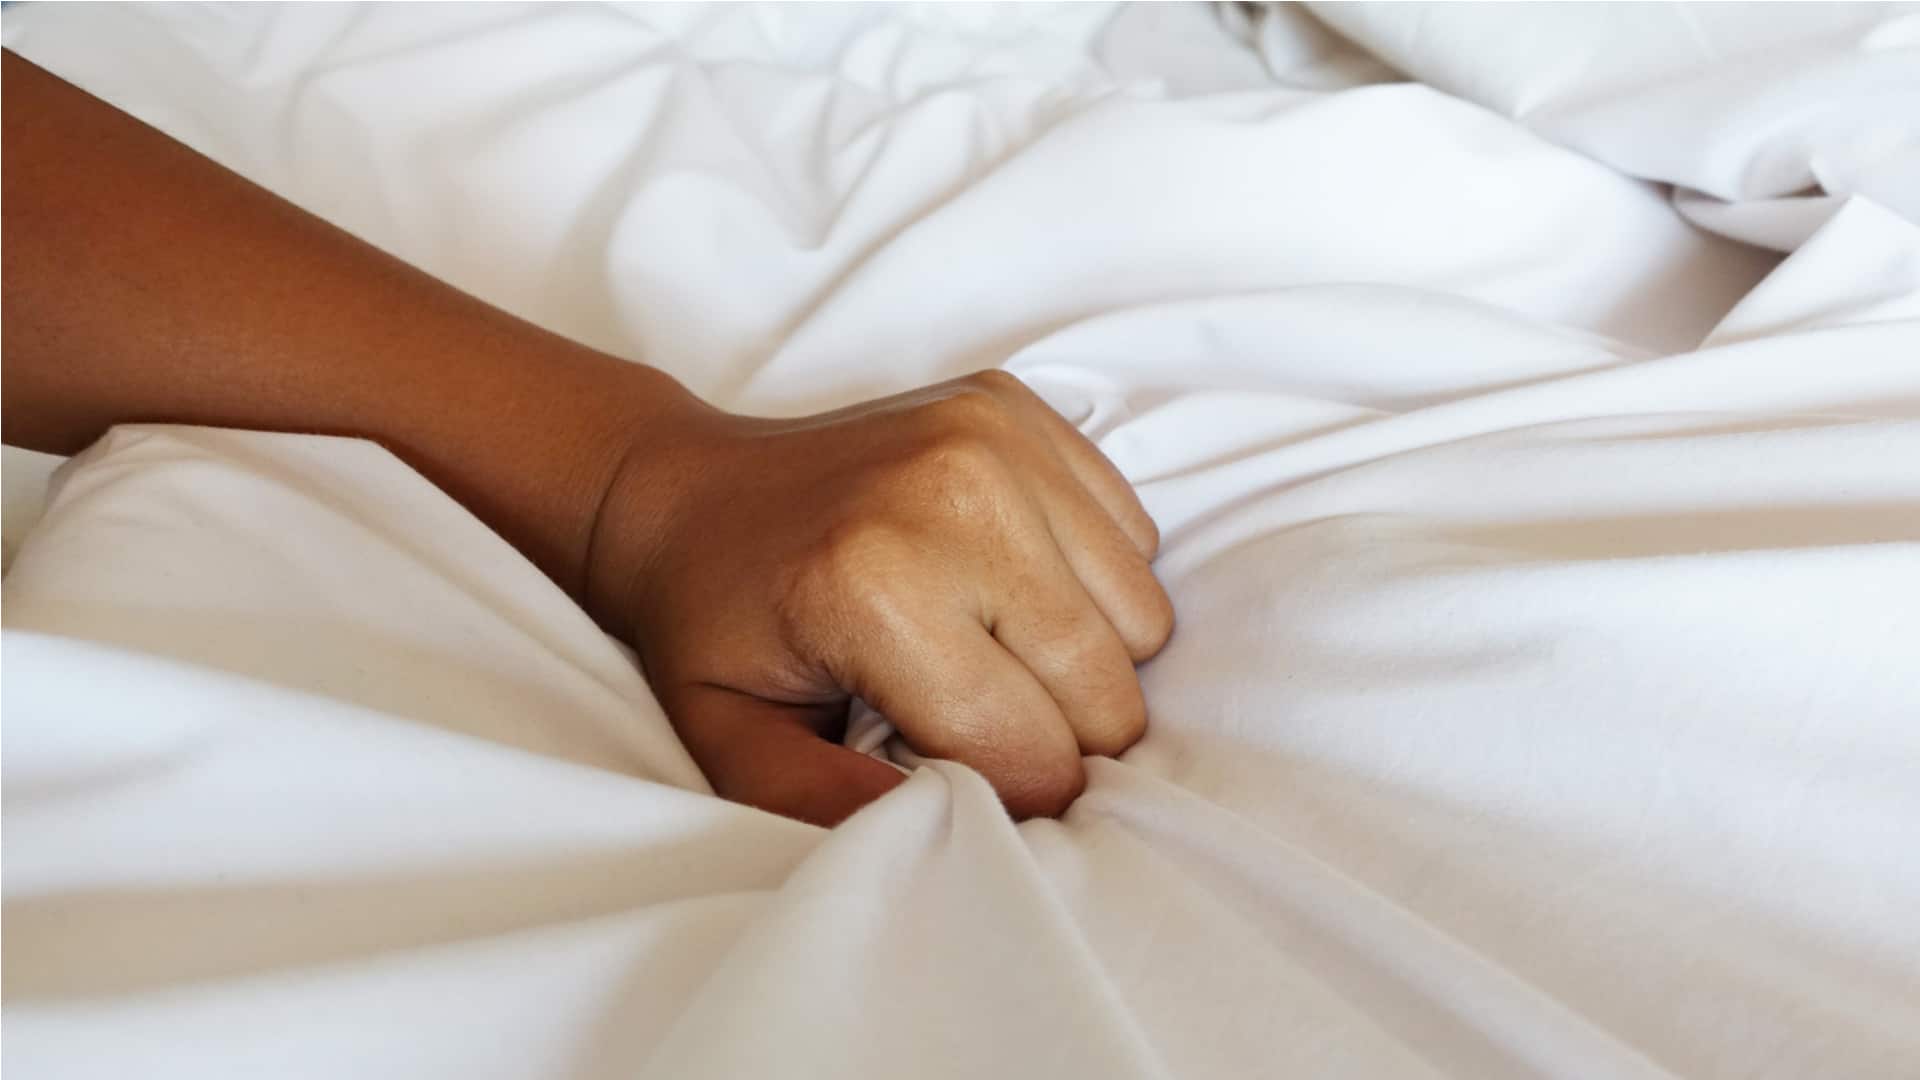 hand of women pulling white sheets in ecstasy, orgasm